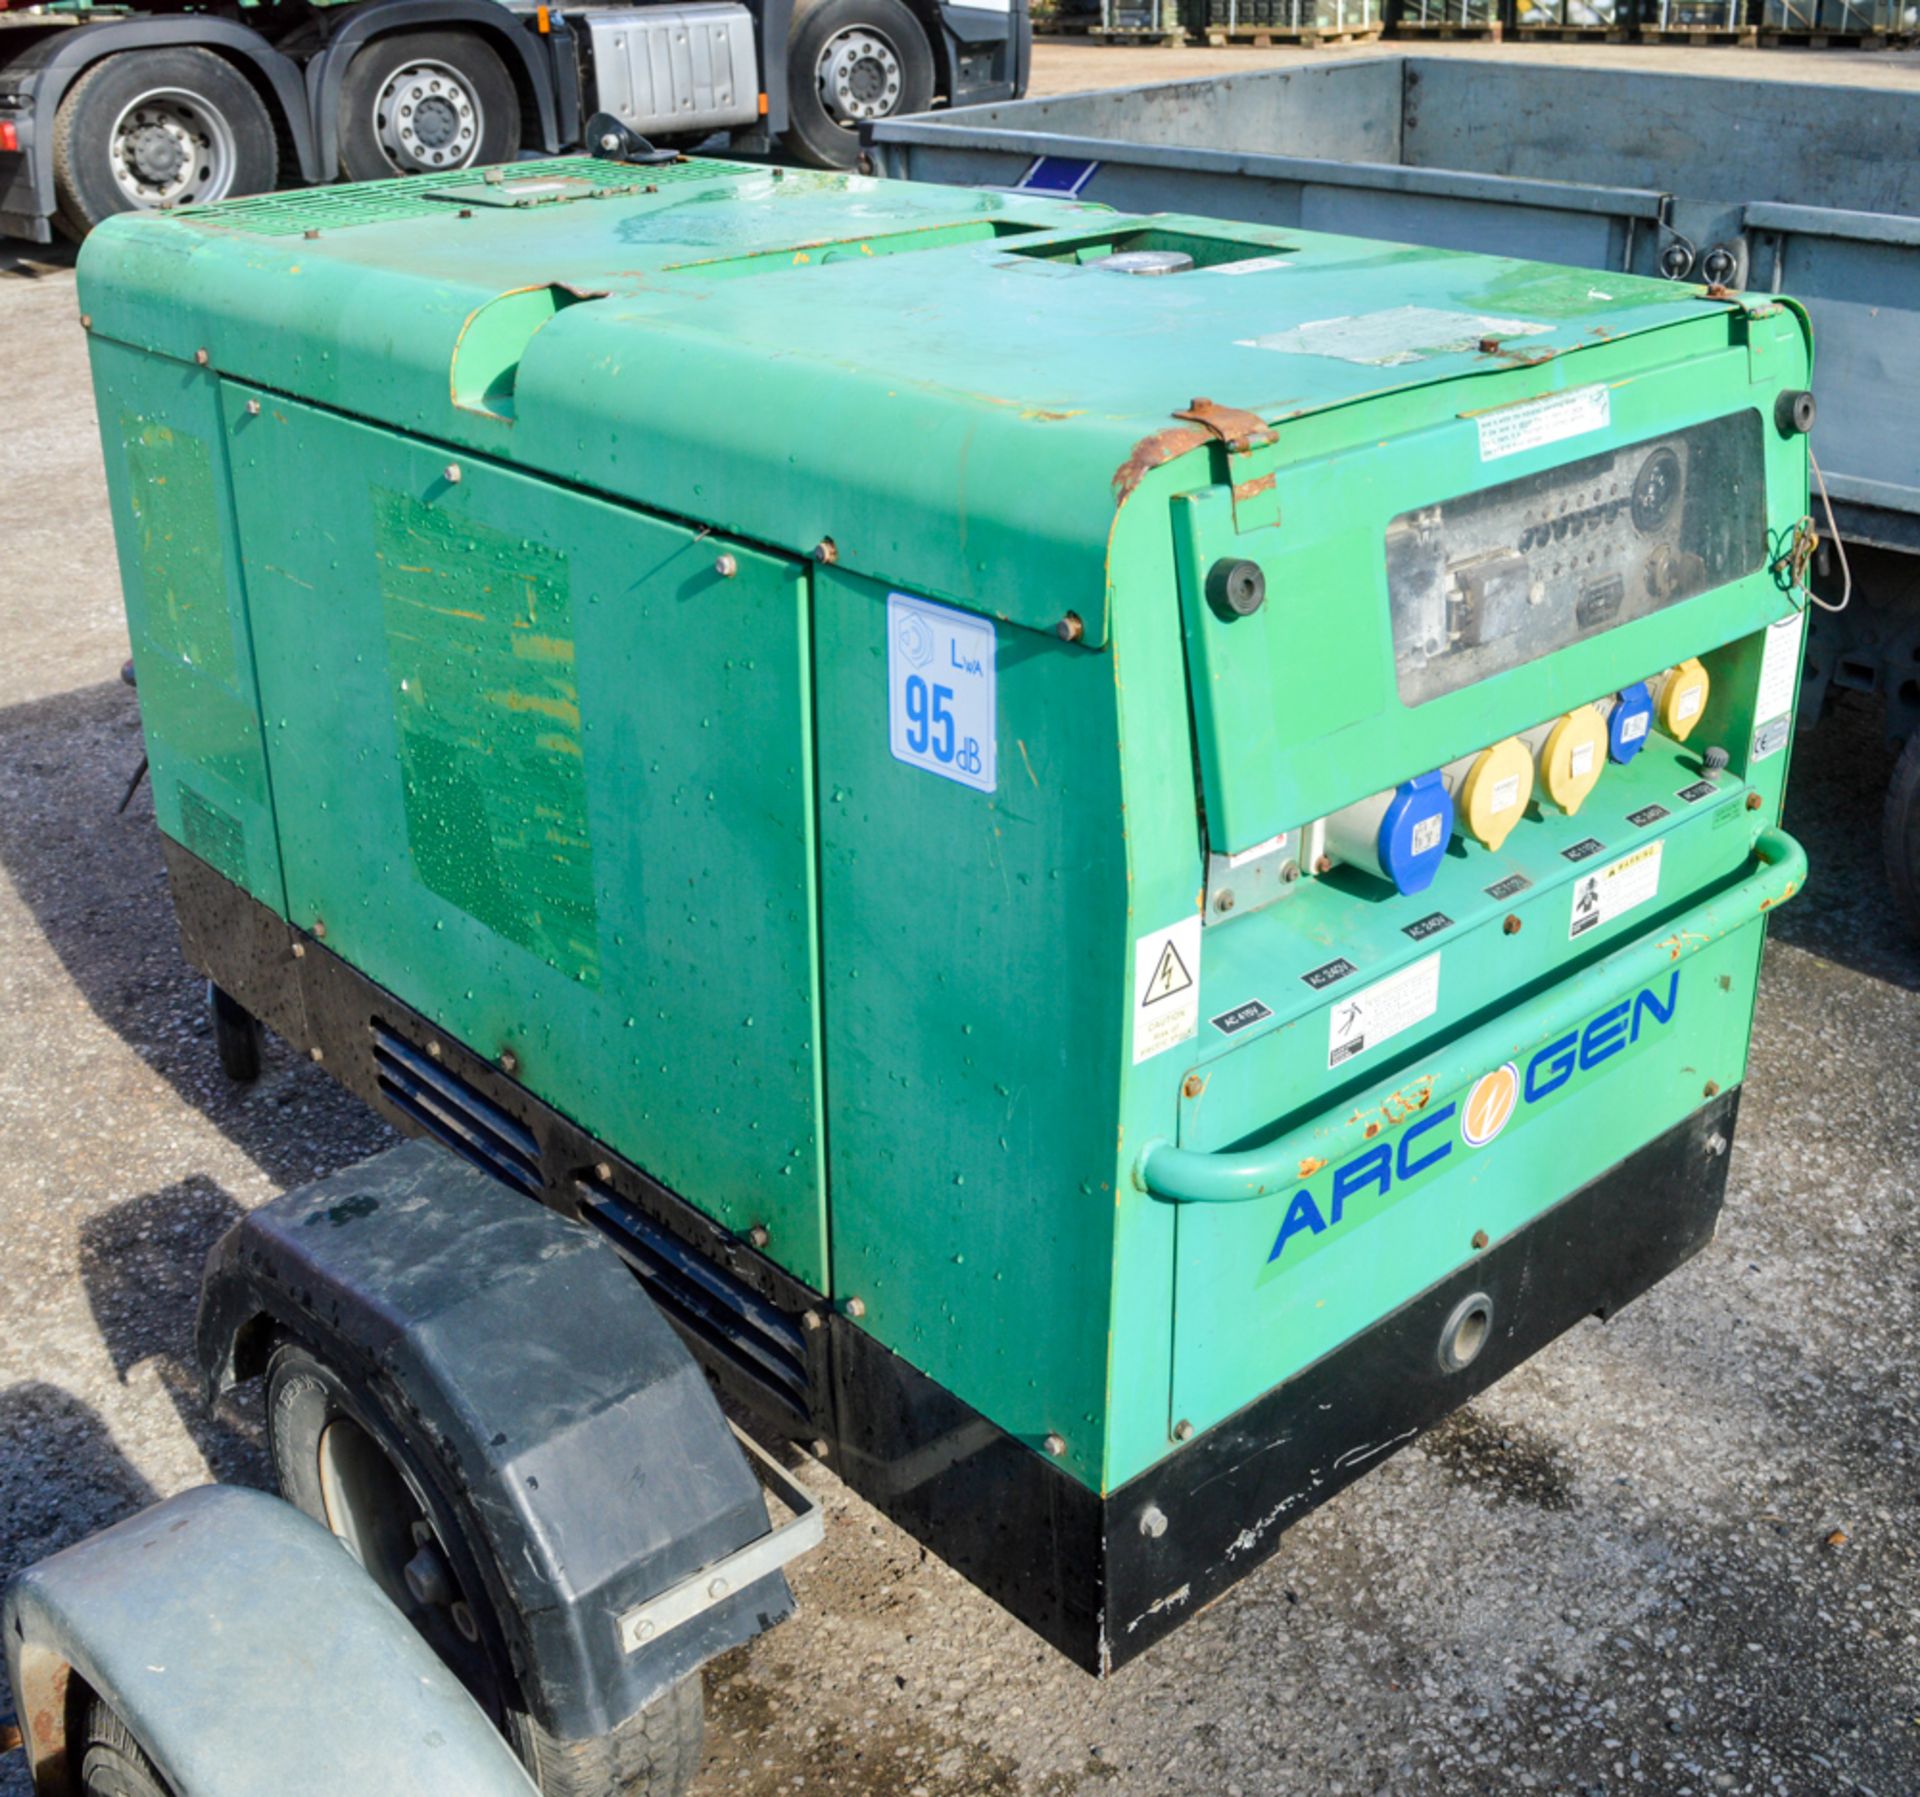 Arc gen diesel driven fast tow mobile welder/generator Year: 2010 S/N: 55947 Recorded Hours: 3412 - Image 2 of 3